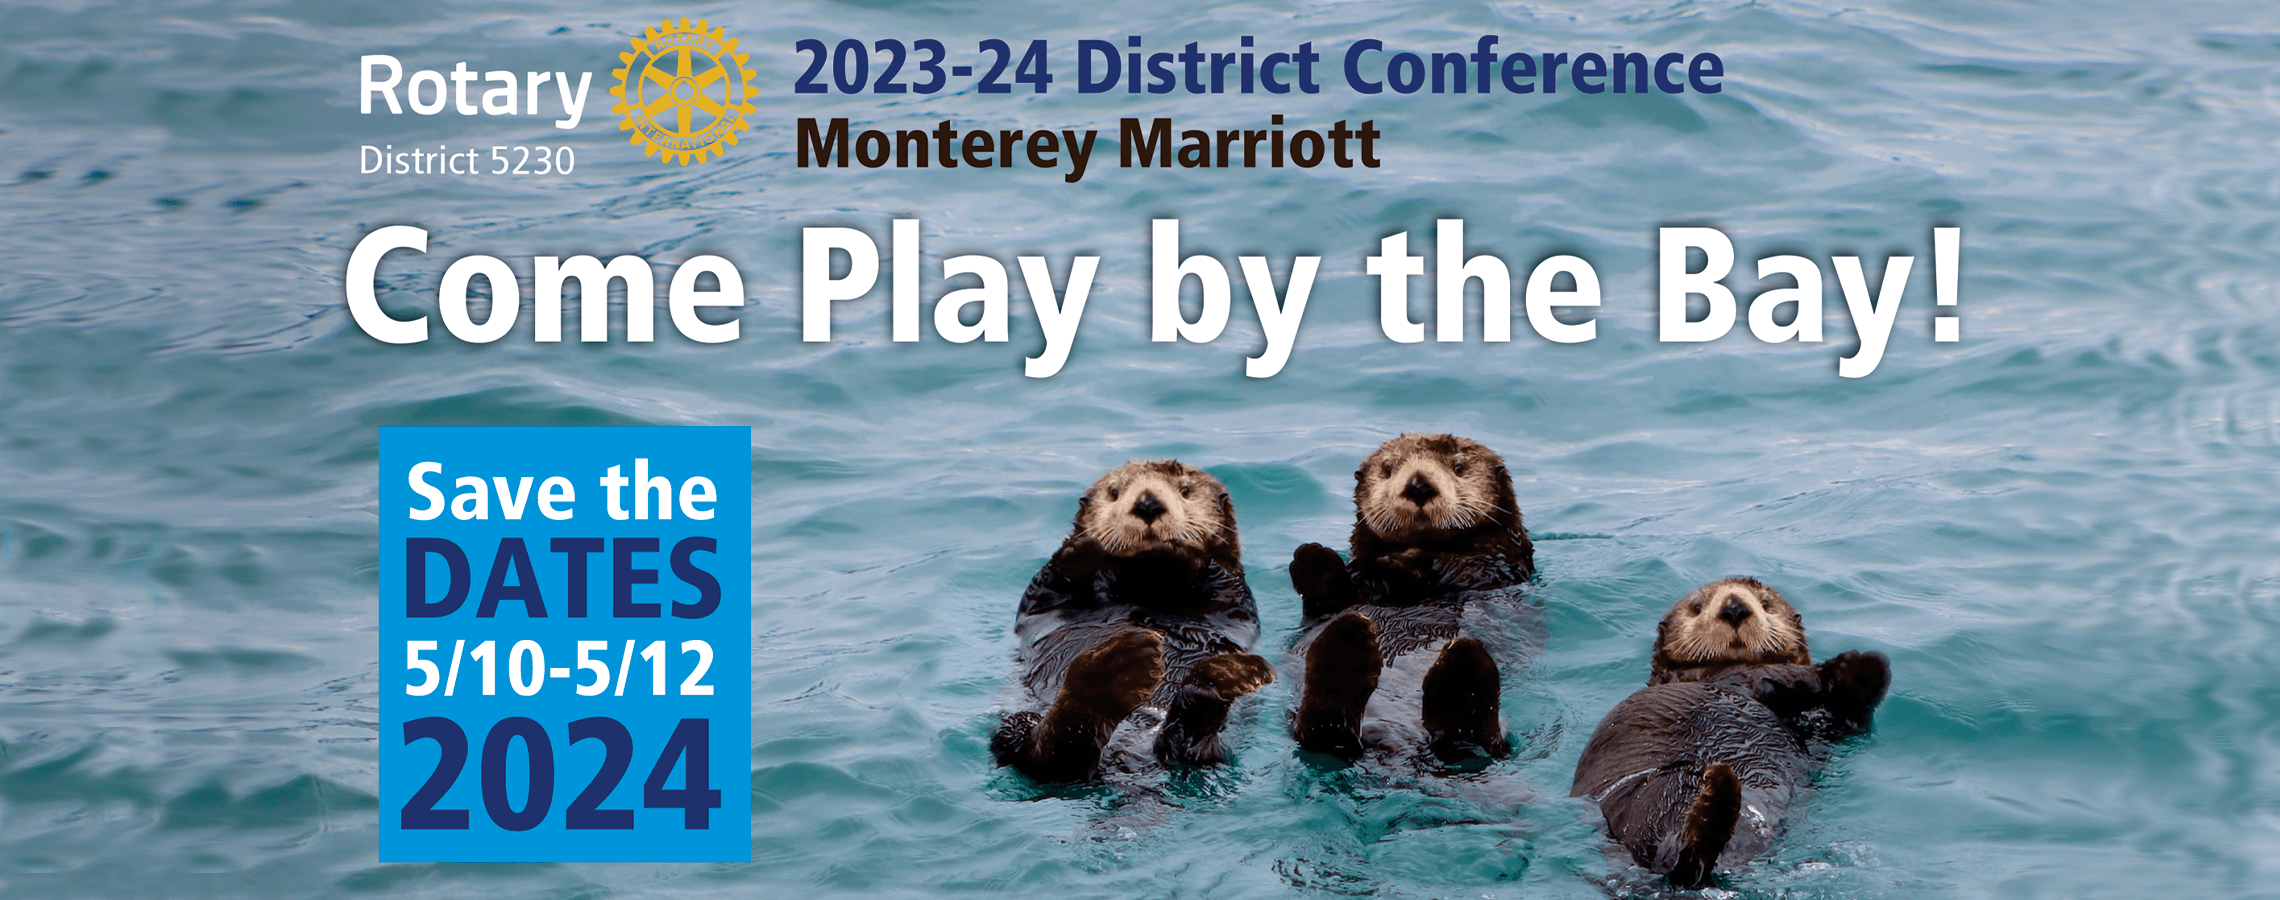 district 5230 2023-24 district conference Monterey Marriott Come Play by the Bay save the dates 5/10-5/12 2024